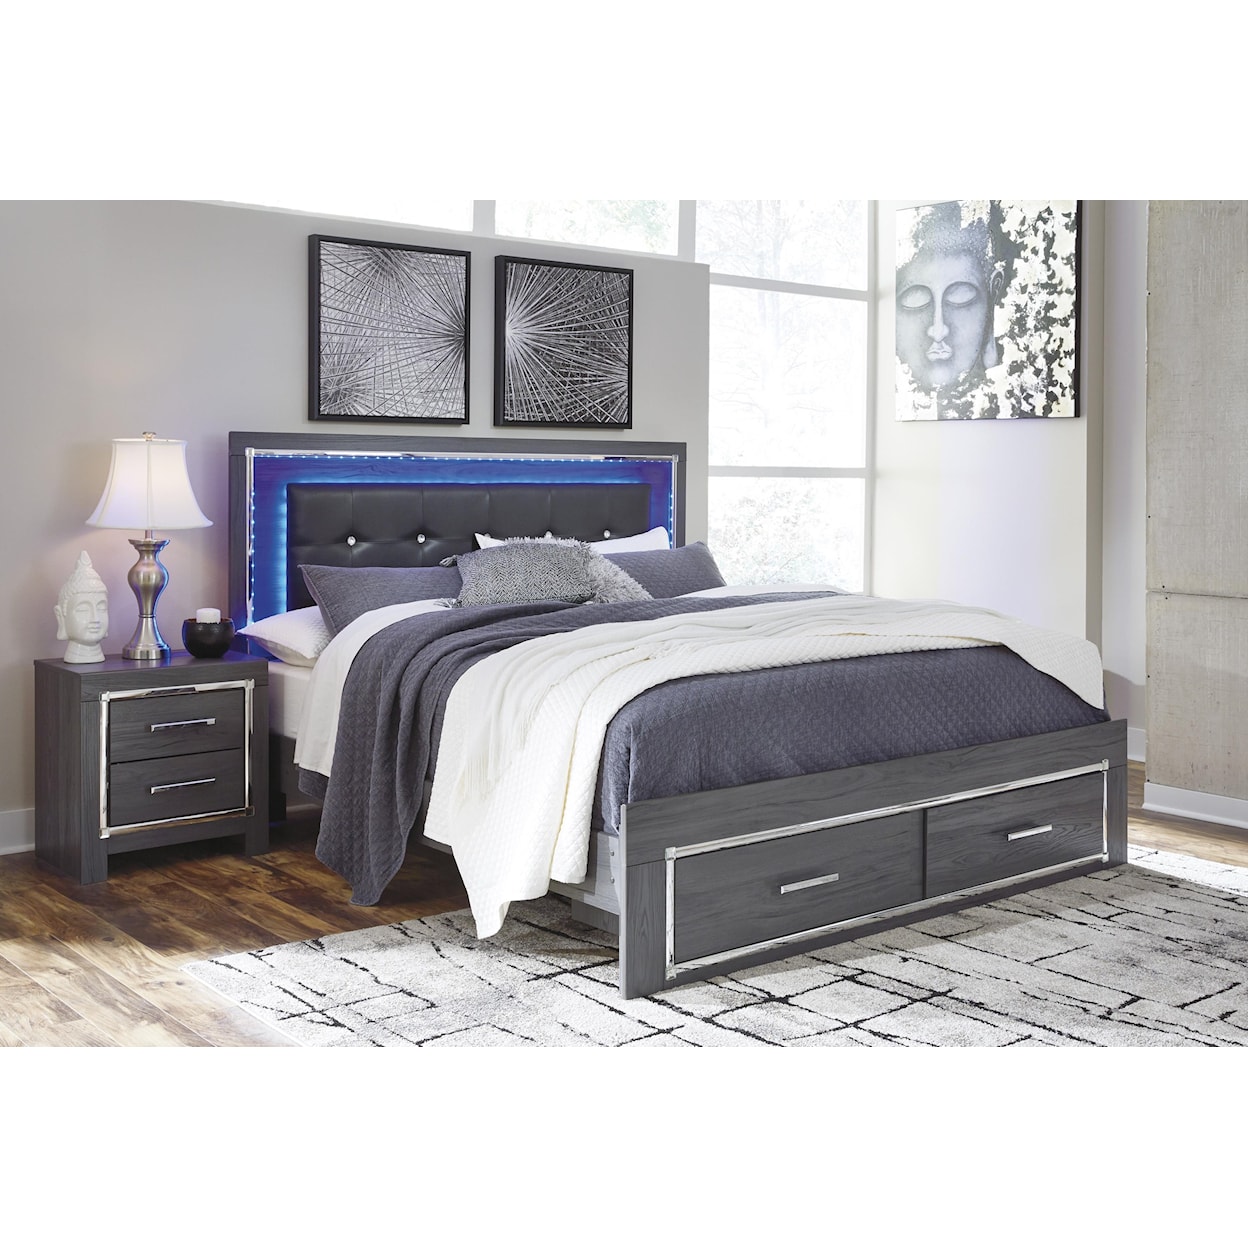 Signature Design by Ashley Lodanna Queen Upholstered Bed